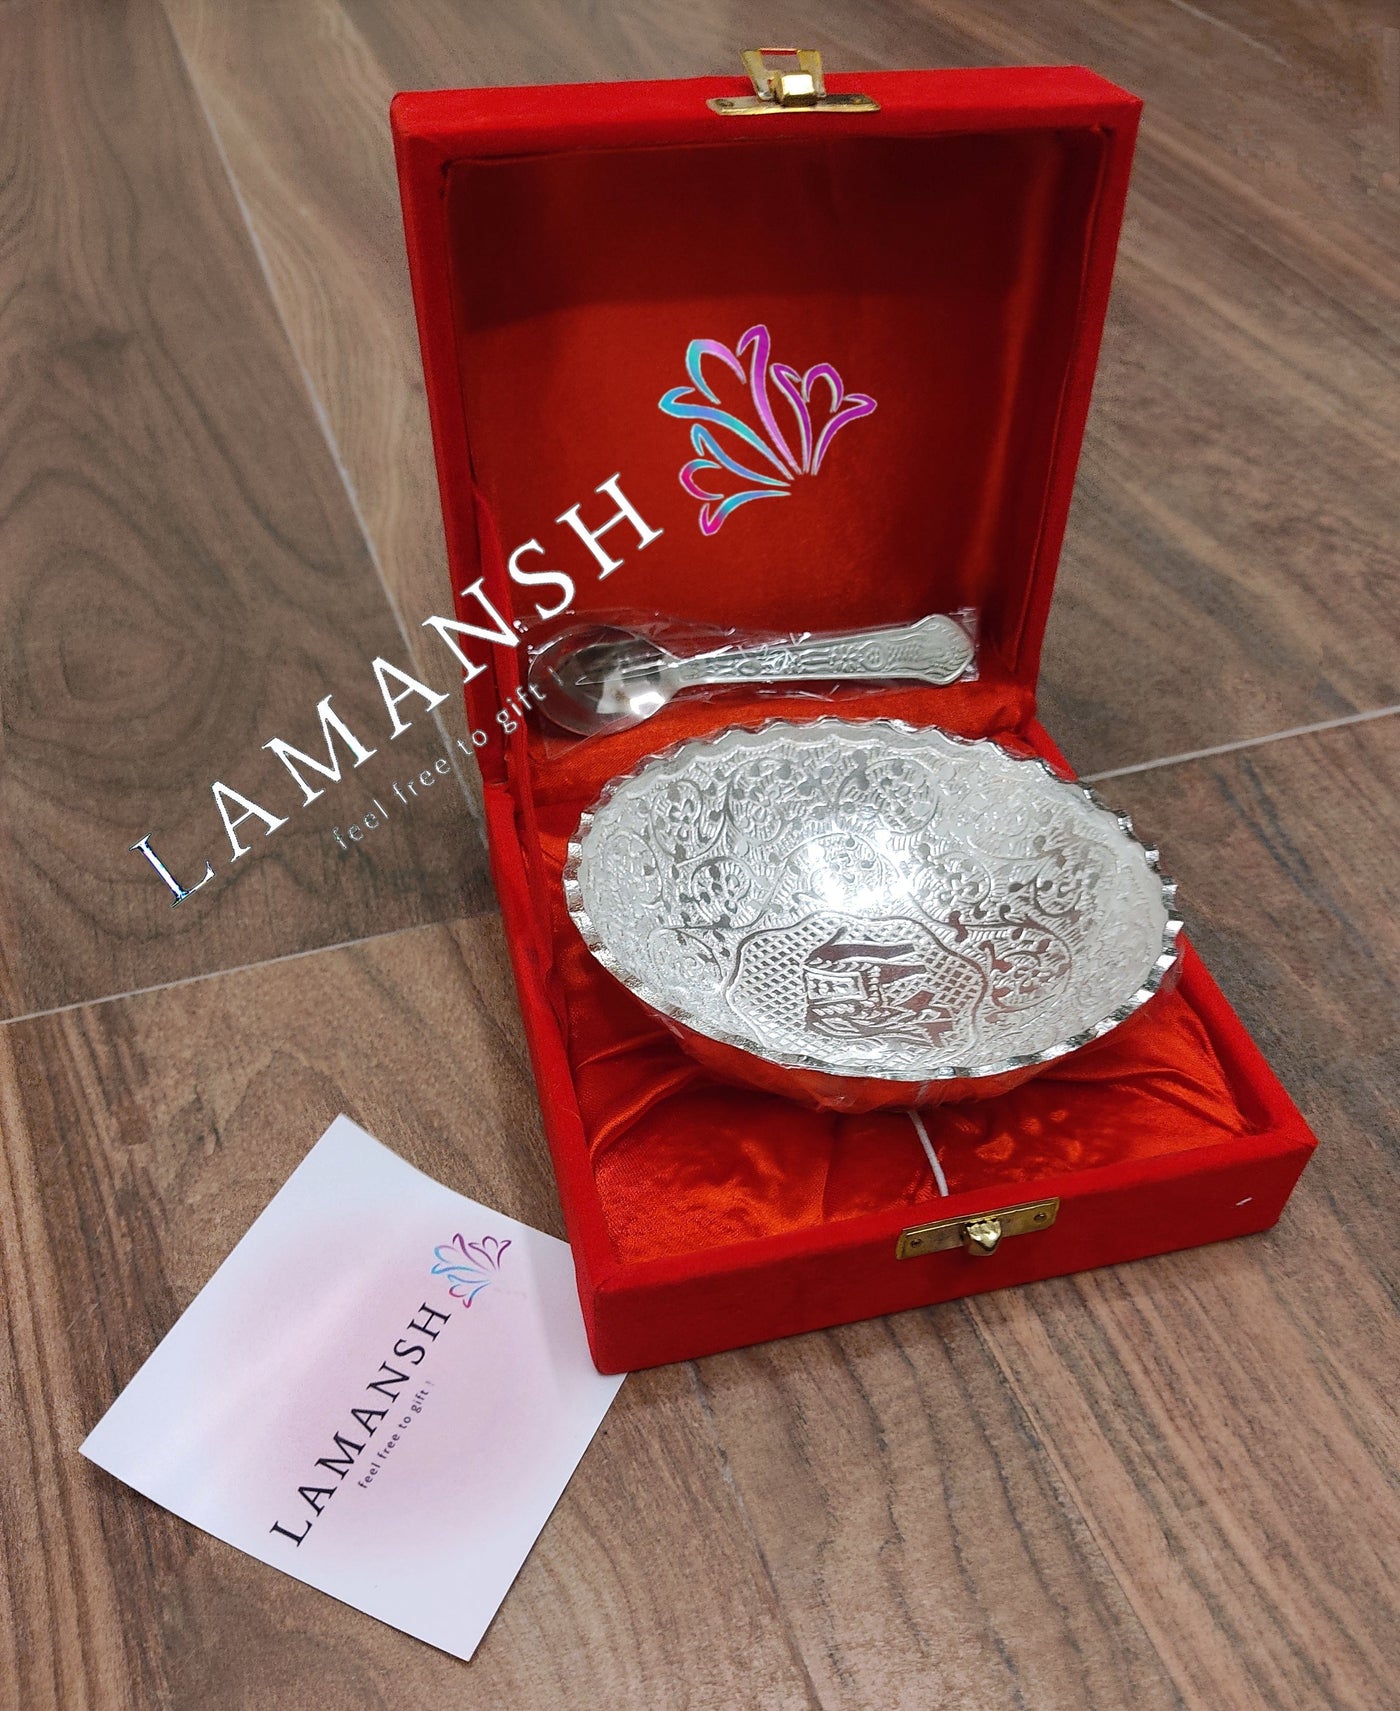 Buy German Silver Gifting Items for Indian Wedding Return Gifts in the USA